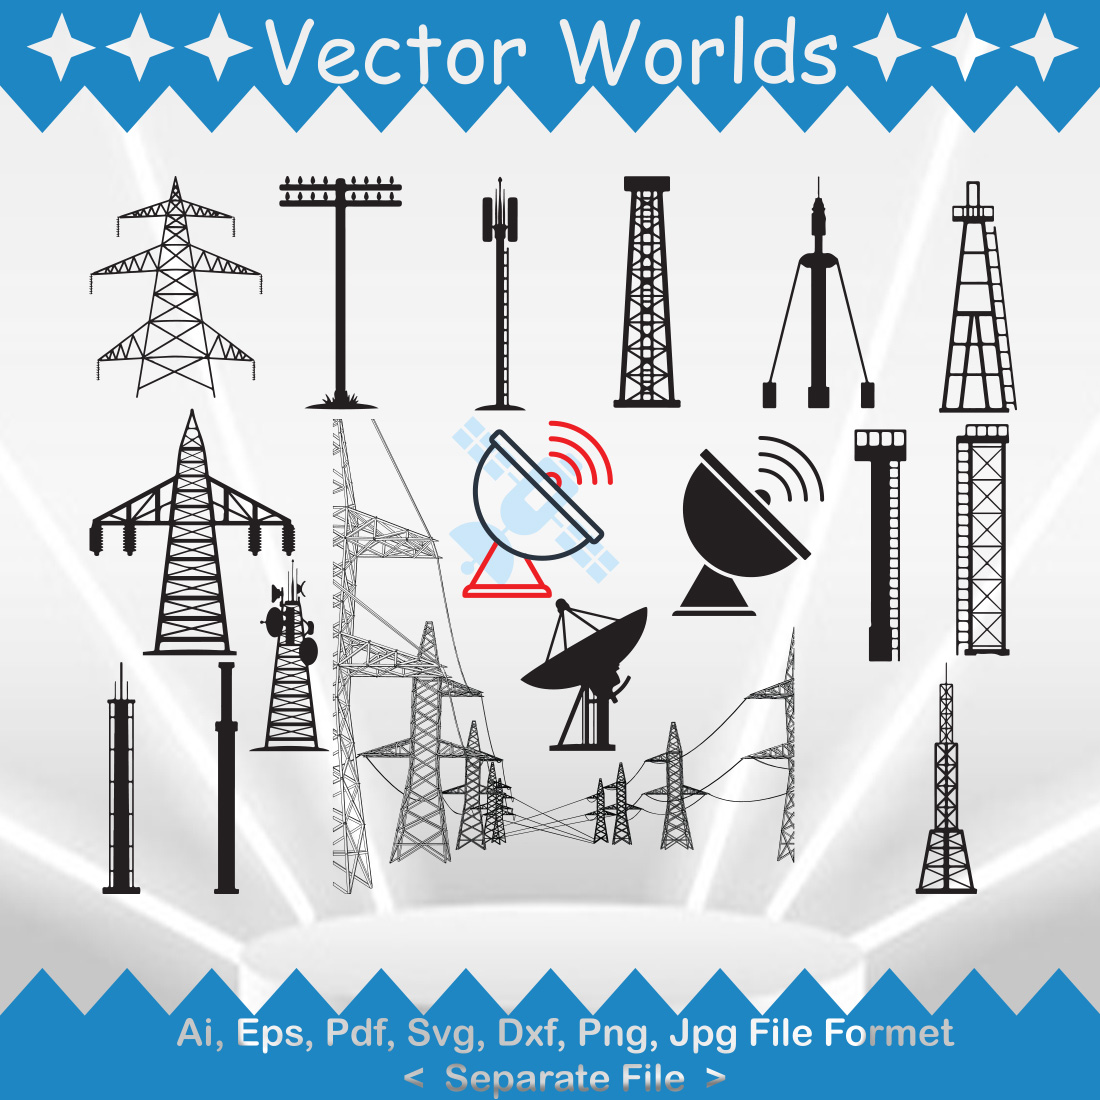 Bundle of vector beautiful images of transmission tower silhouettes.